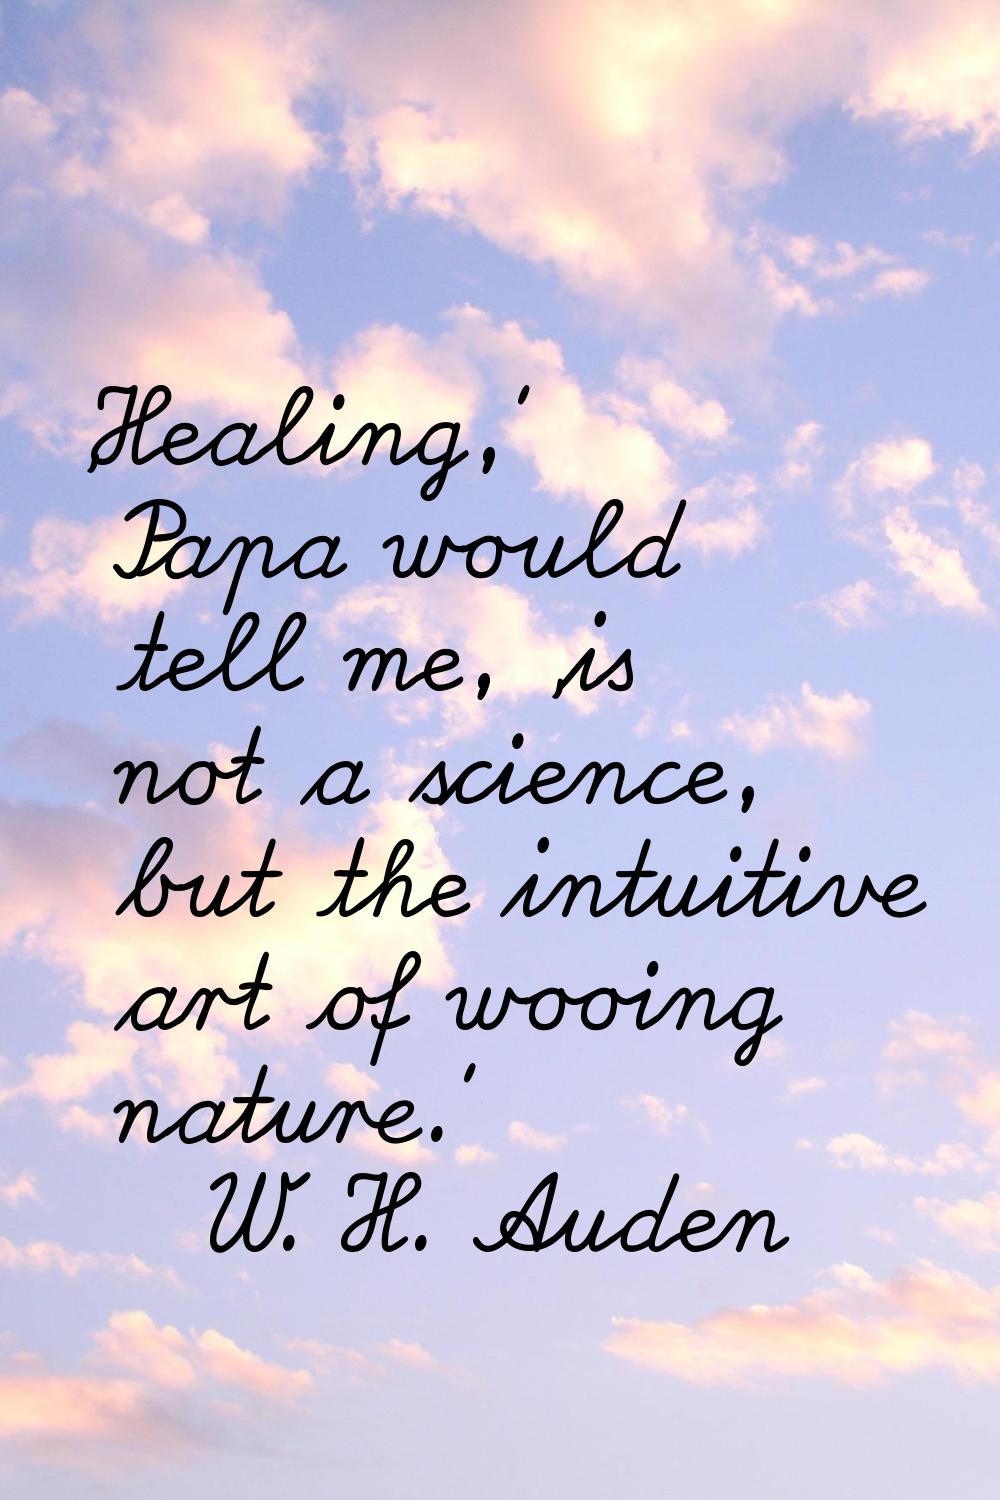 'Healing,' Papa would tell me, 'is not a science, but the intuitive art of wooing nature.'